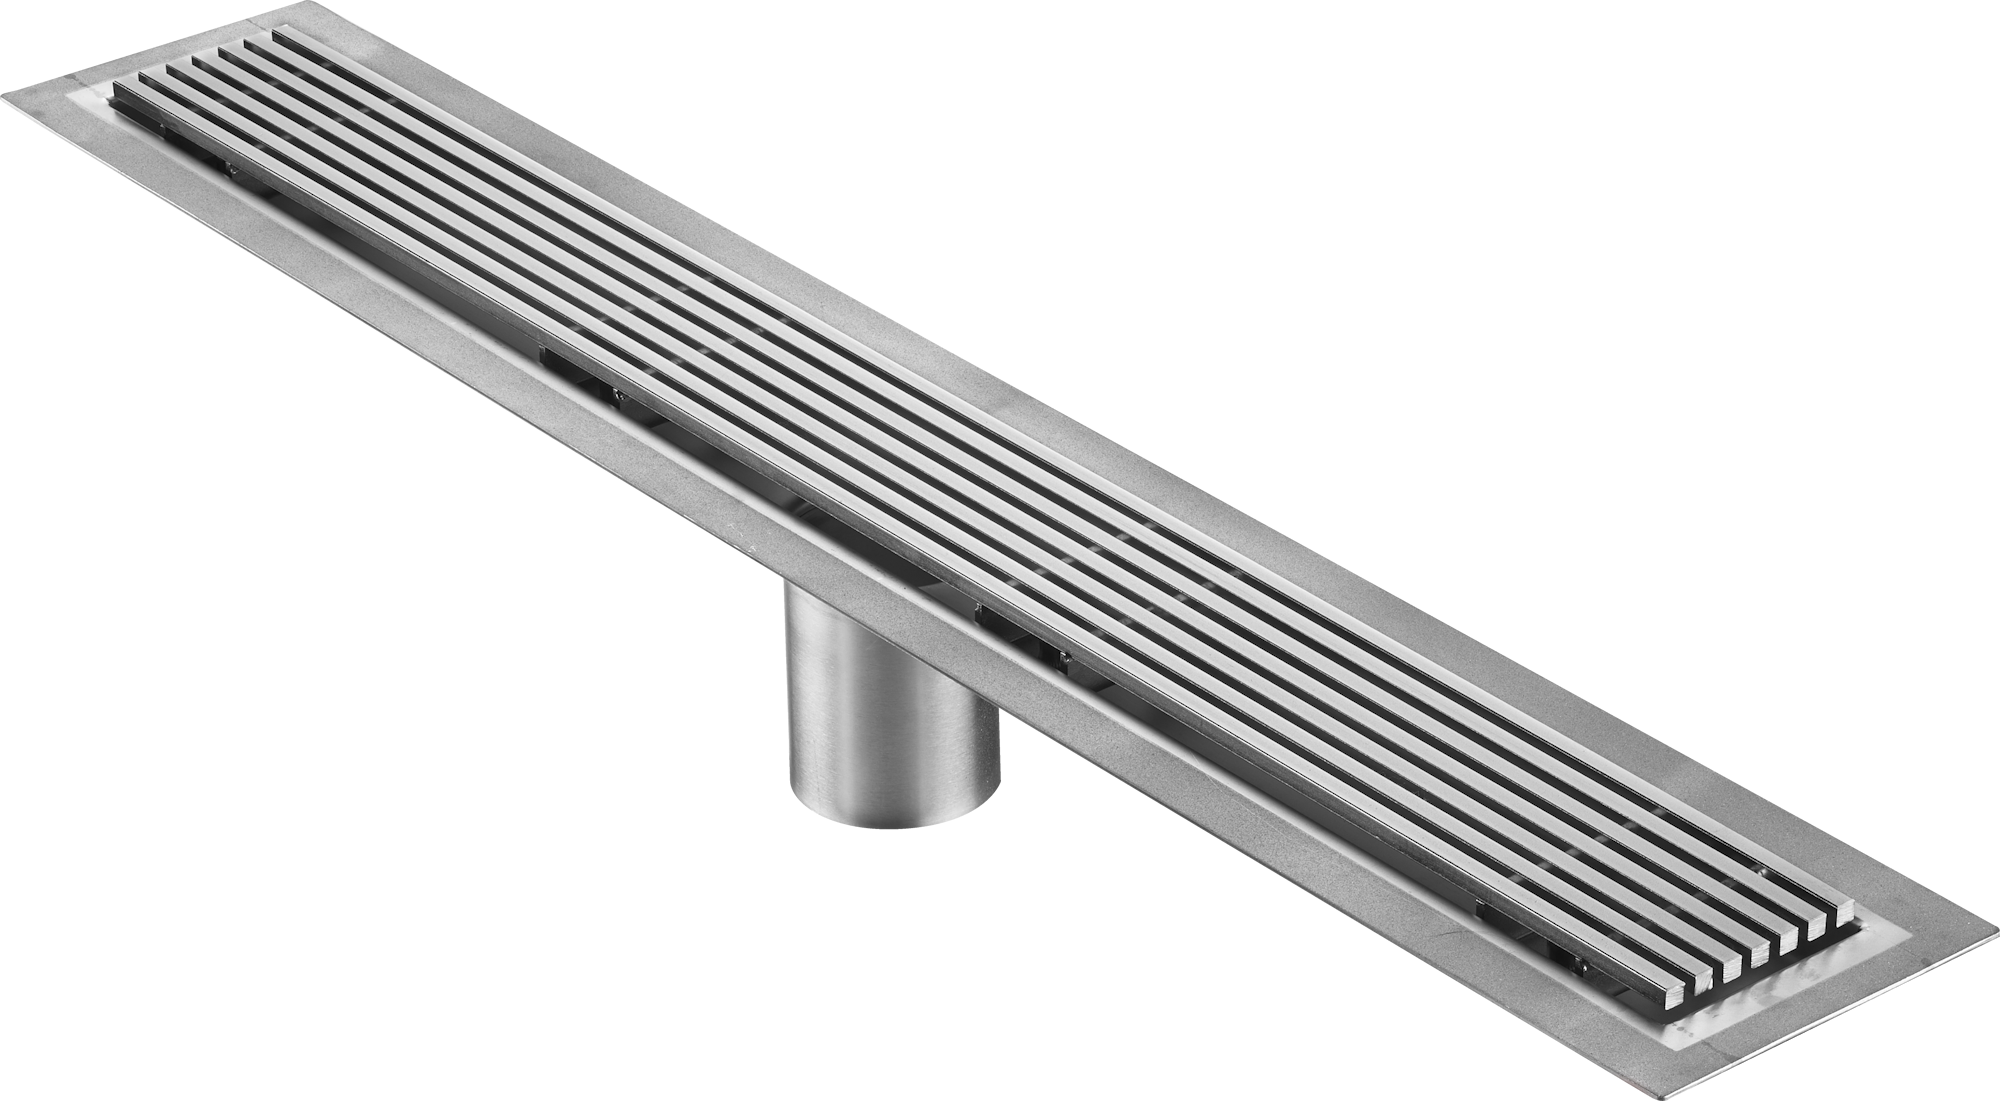 65 Inch Wedge Wire Grate Linear Drain Brushed Stainless Steel, Drains Unlimited